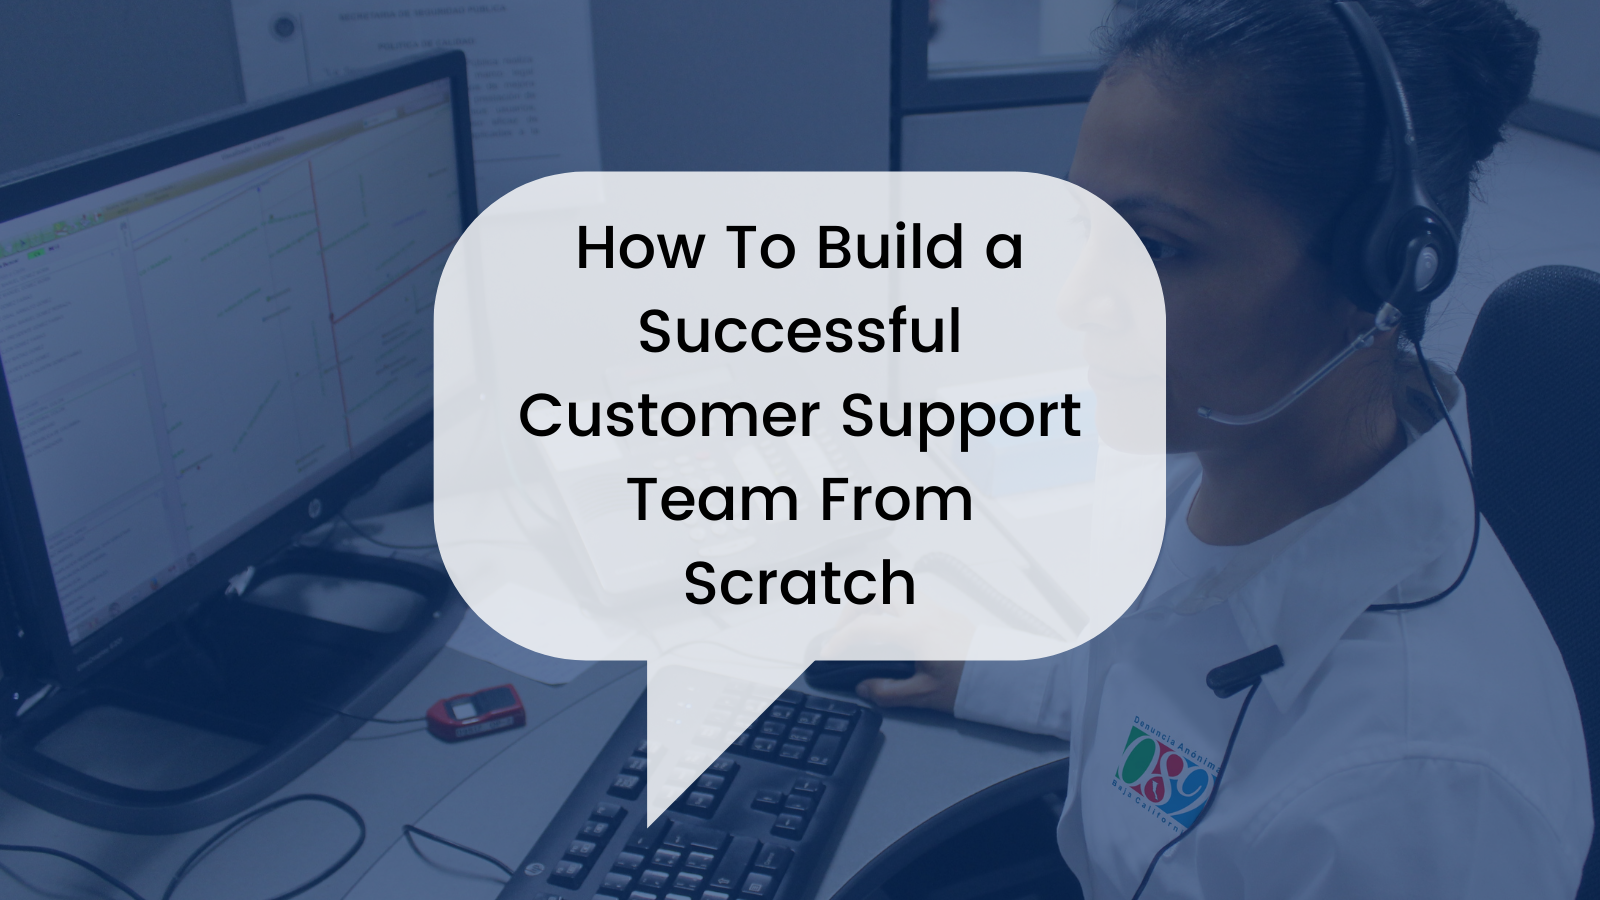 How To Build a Successful Customer Support Team From Scratch